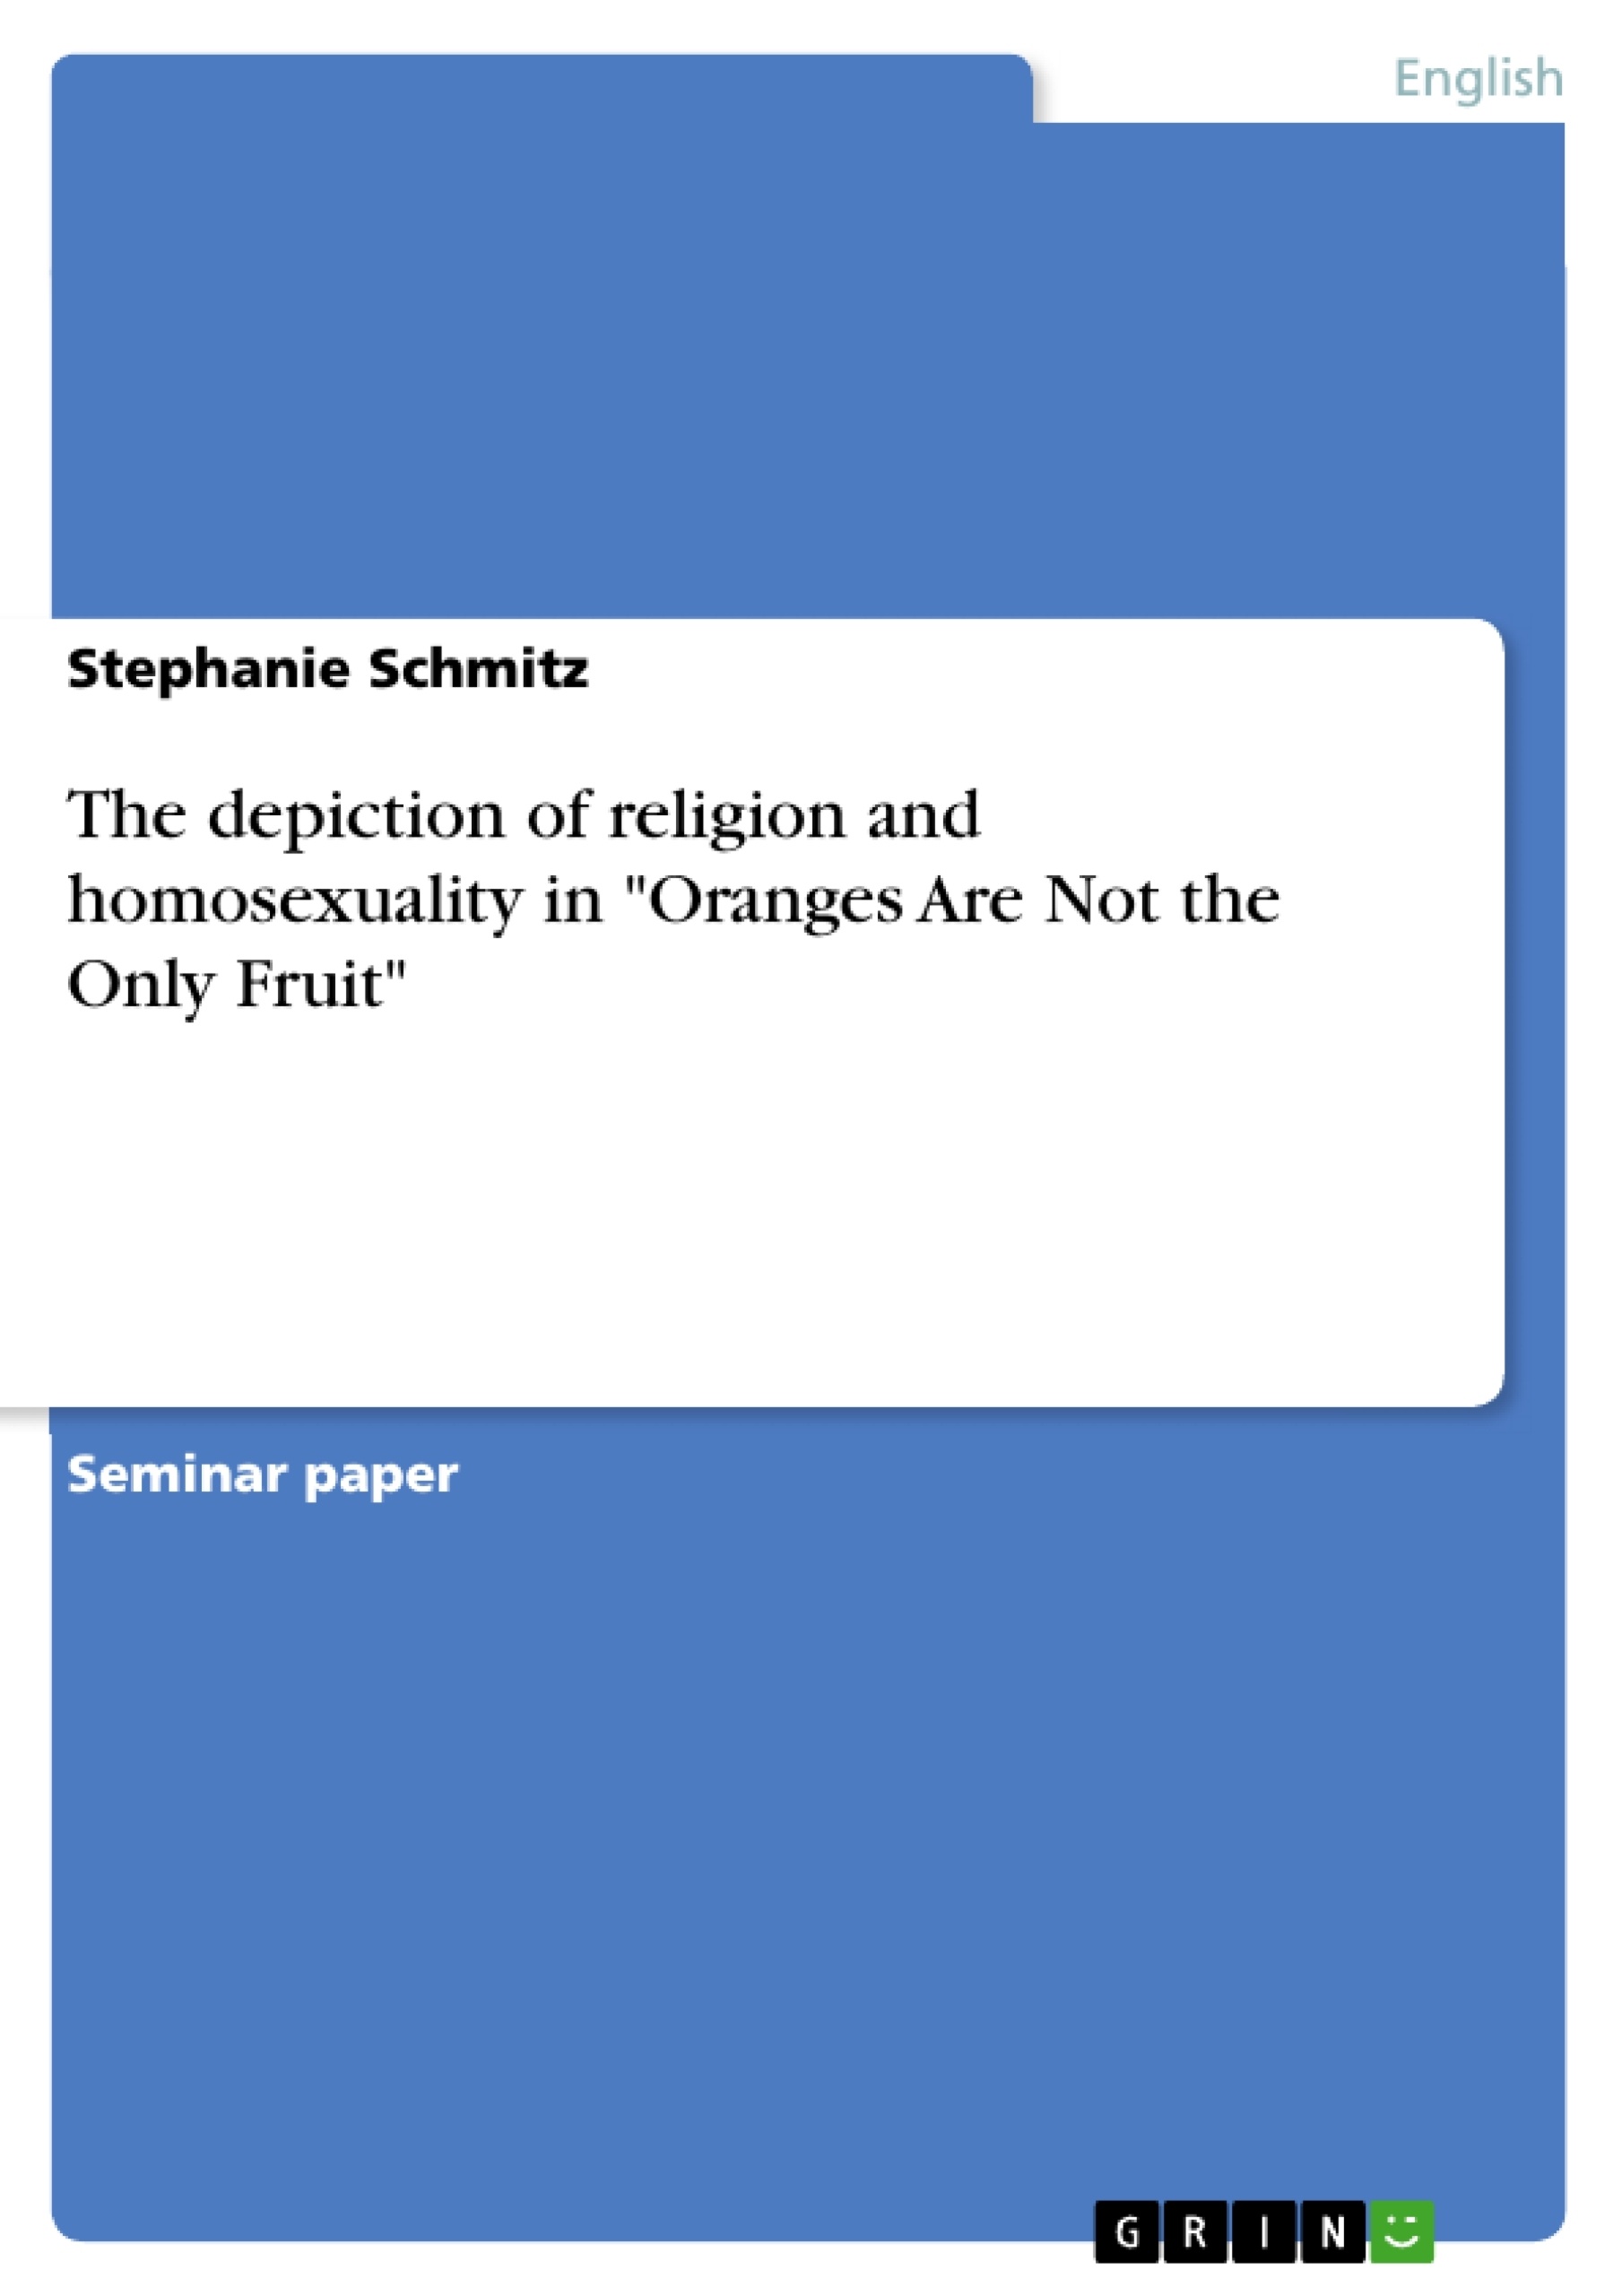 Título: The depiction of religion and homosexuality in "Oranges Are Not the Only Fruit"